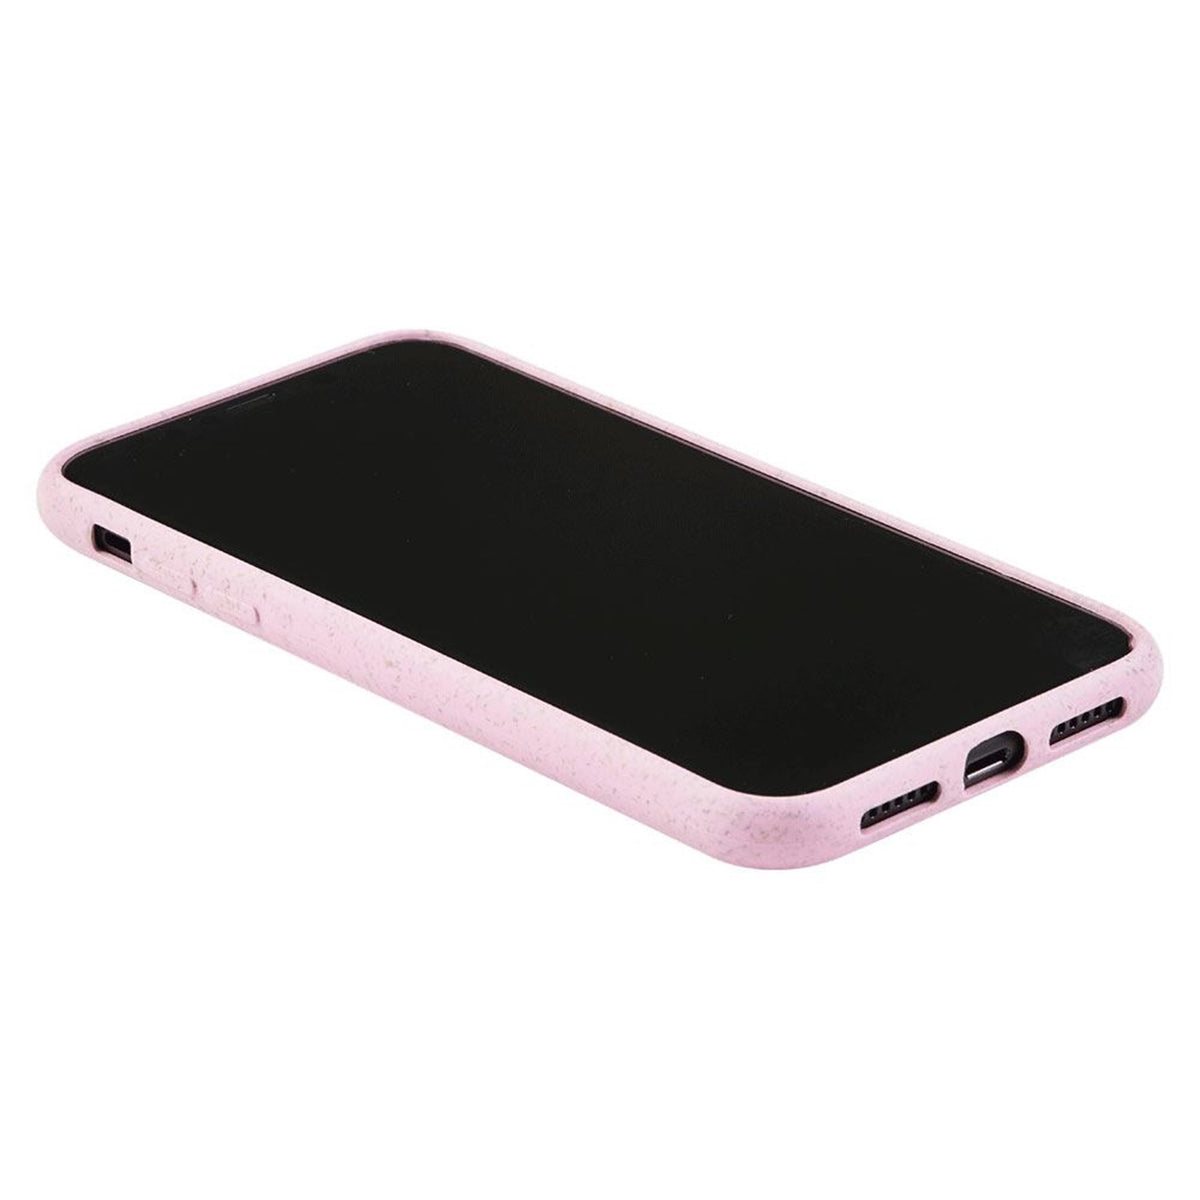 GreyLime-iPhone-XR-biodegradable-cover-Pink-COIPXR05-V3.jpg